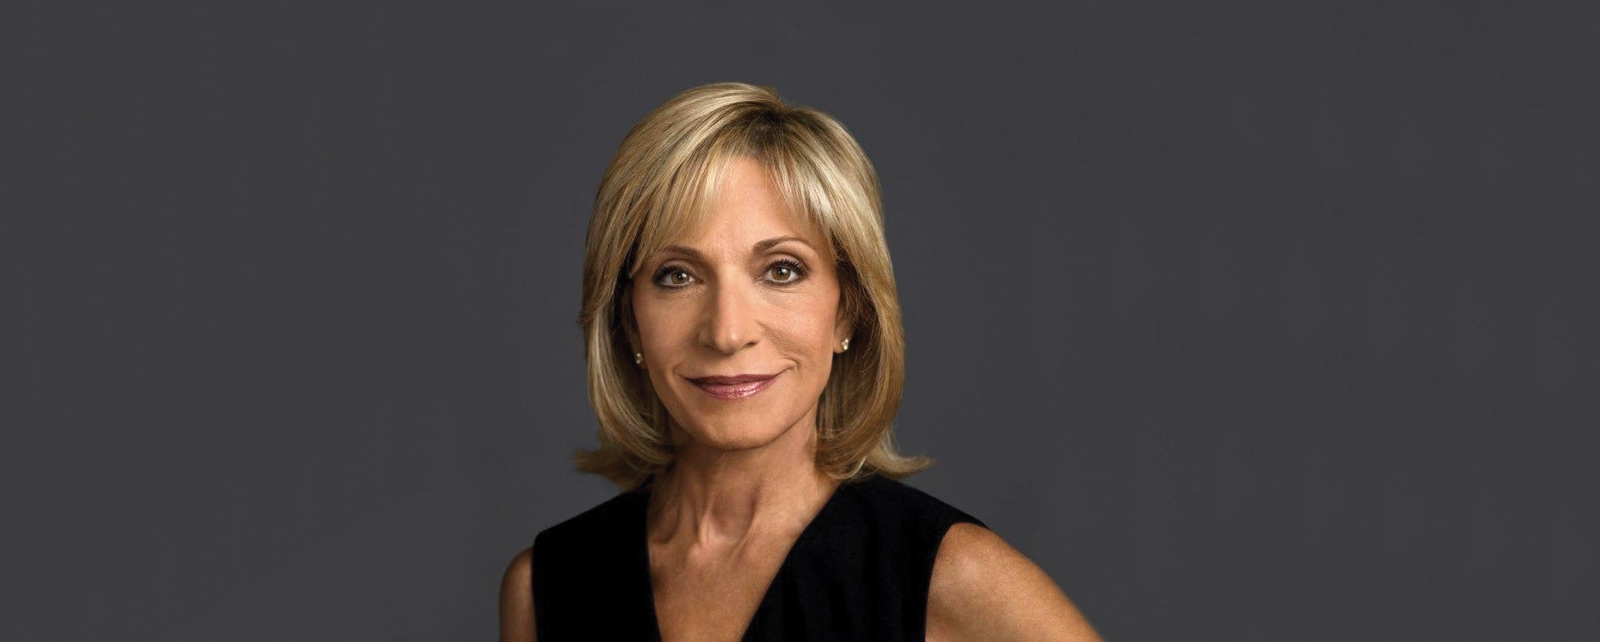 New Gift Endows Andrea Mitchell Center for the Study of Democracy | Omnia